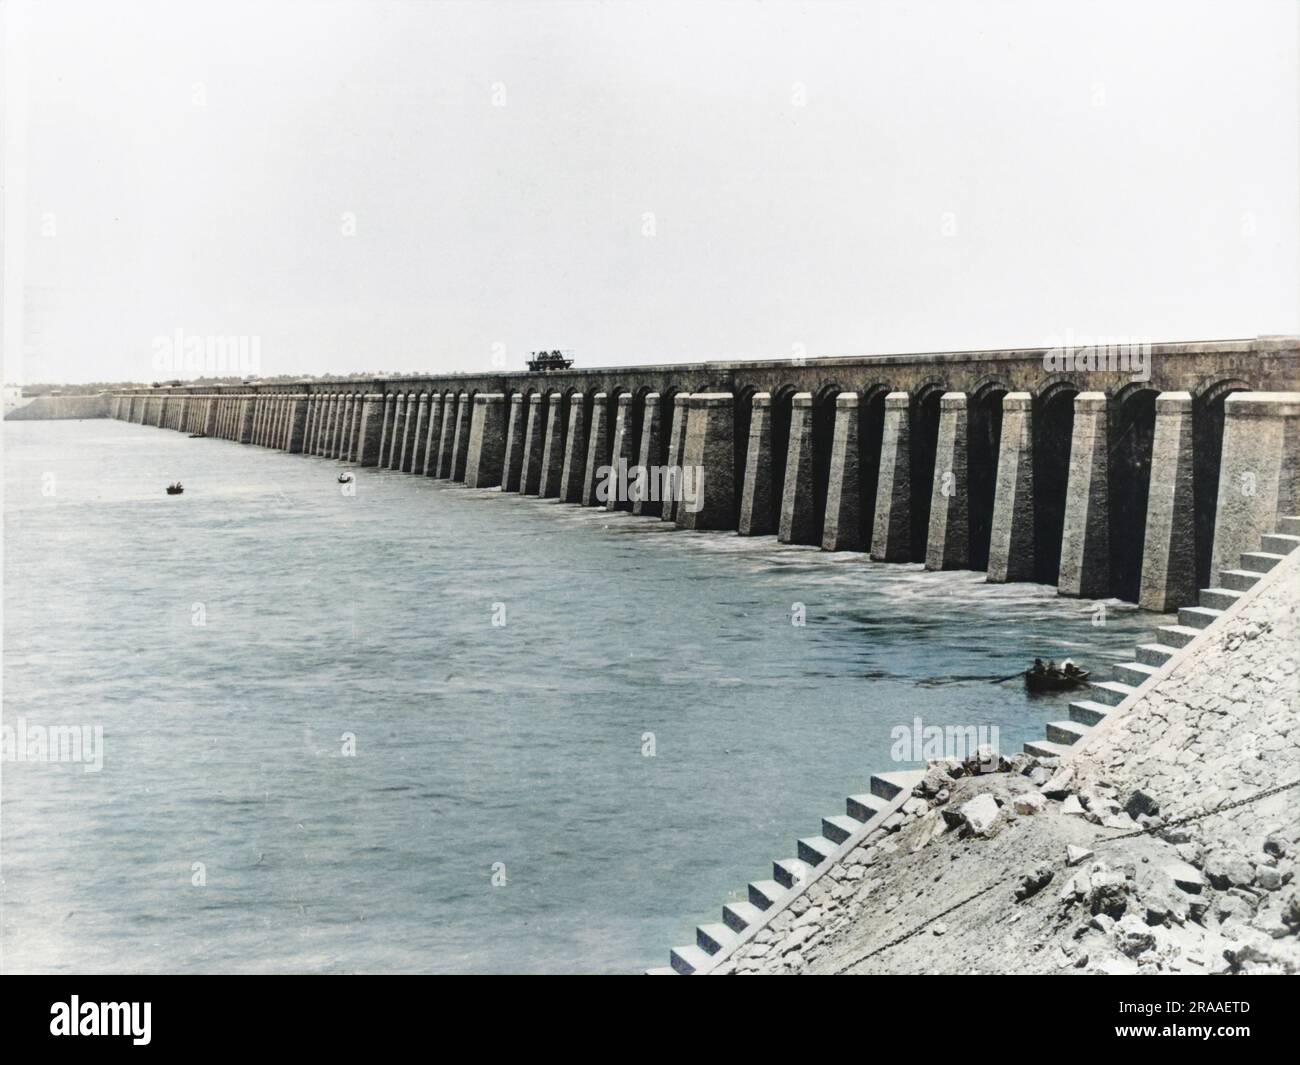 The Assiut or Asyut Barrage damming the River Nile in Egypt (seen here from downstream), about 350 miles downstream of the Aswan Dam. Designed by British engineer Sir William Willcocks, who also designed the Aswan Dam, it was built between 1898 and 1903.     Date: 1902 Stock Photo